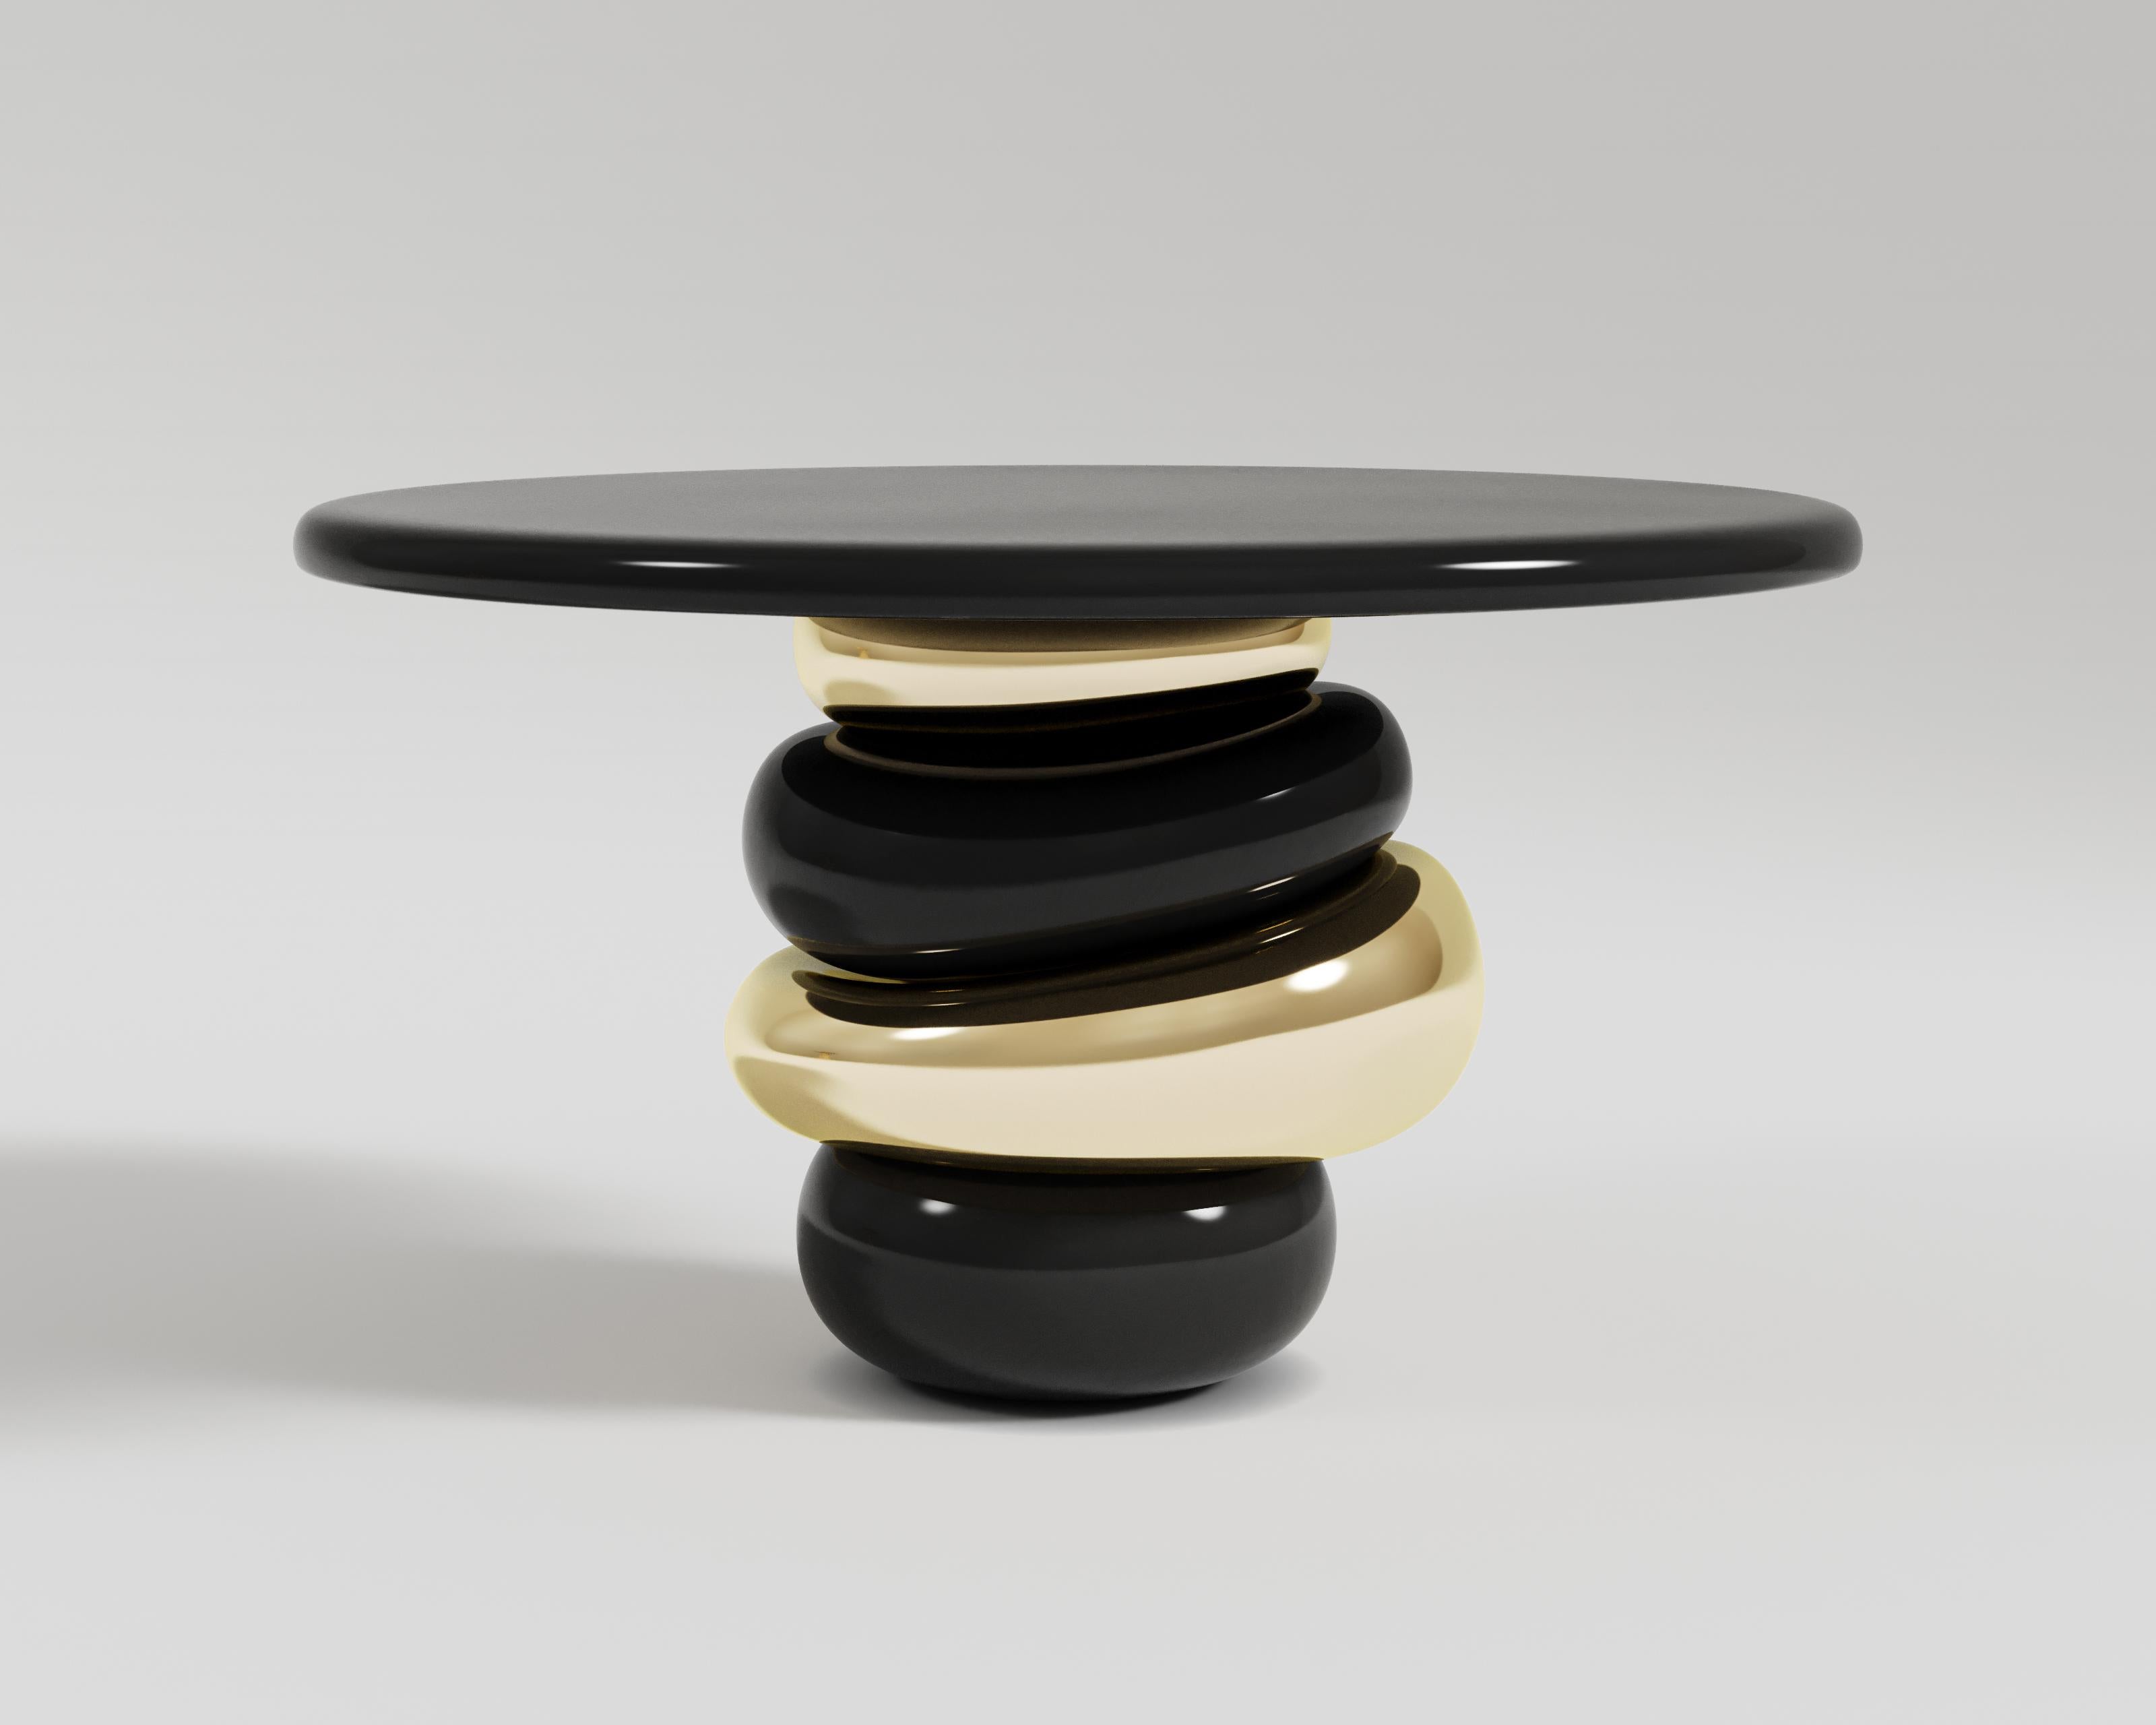 Ruche Console Black Lacquer
Ruche is a ballet of disparate elements that goes beyond the duties of being functional and turns out to be a mesmerizing art. The frame is constructed entirely from metal, one can easily visualize the toughness and